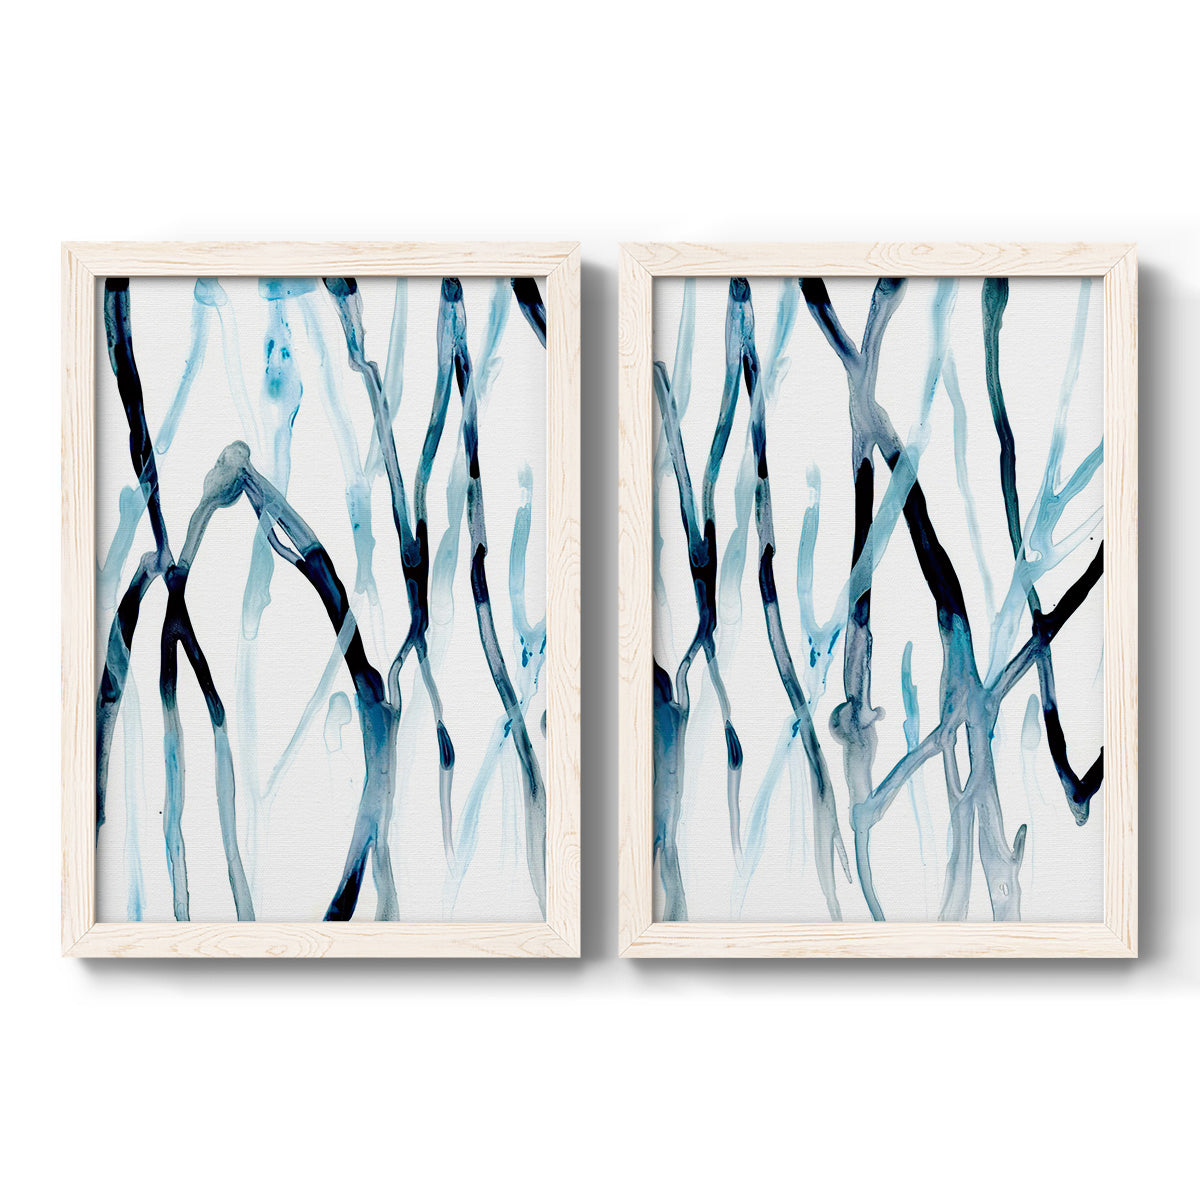 Runnel I - Premium Framed Canvas 2 Piece Set - Ready to Hang